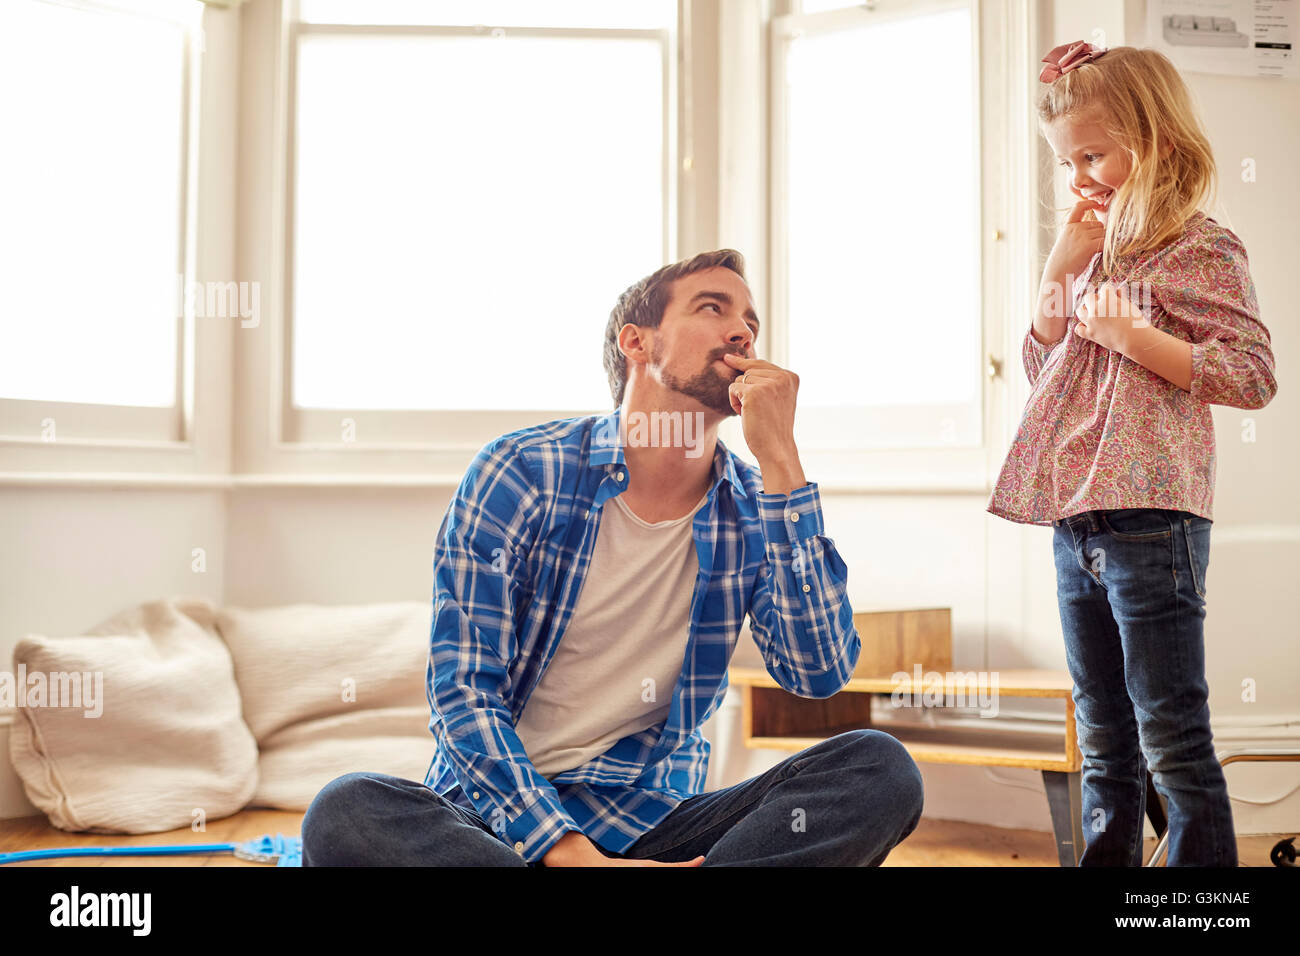 Young girl looking at her father, with mischievous expression Stock Photo